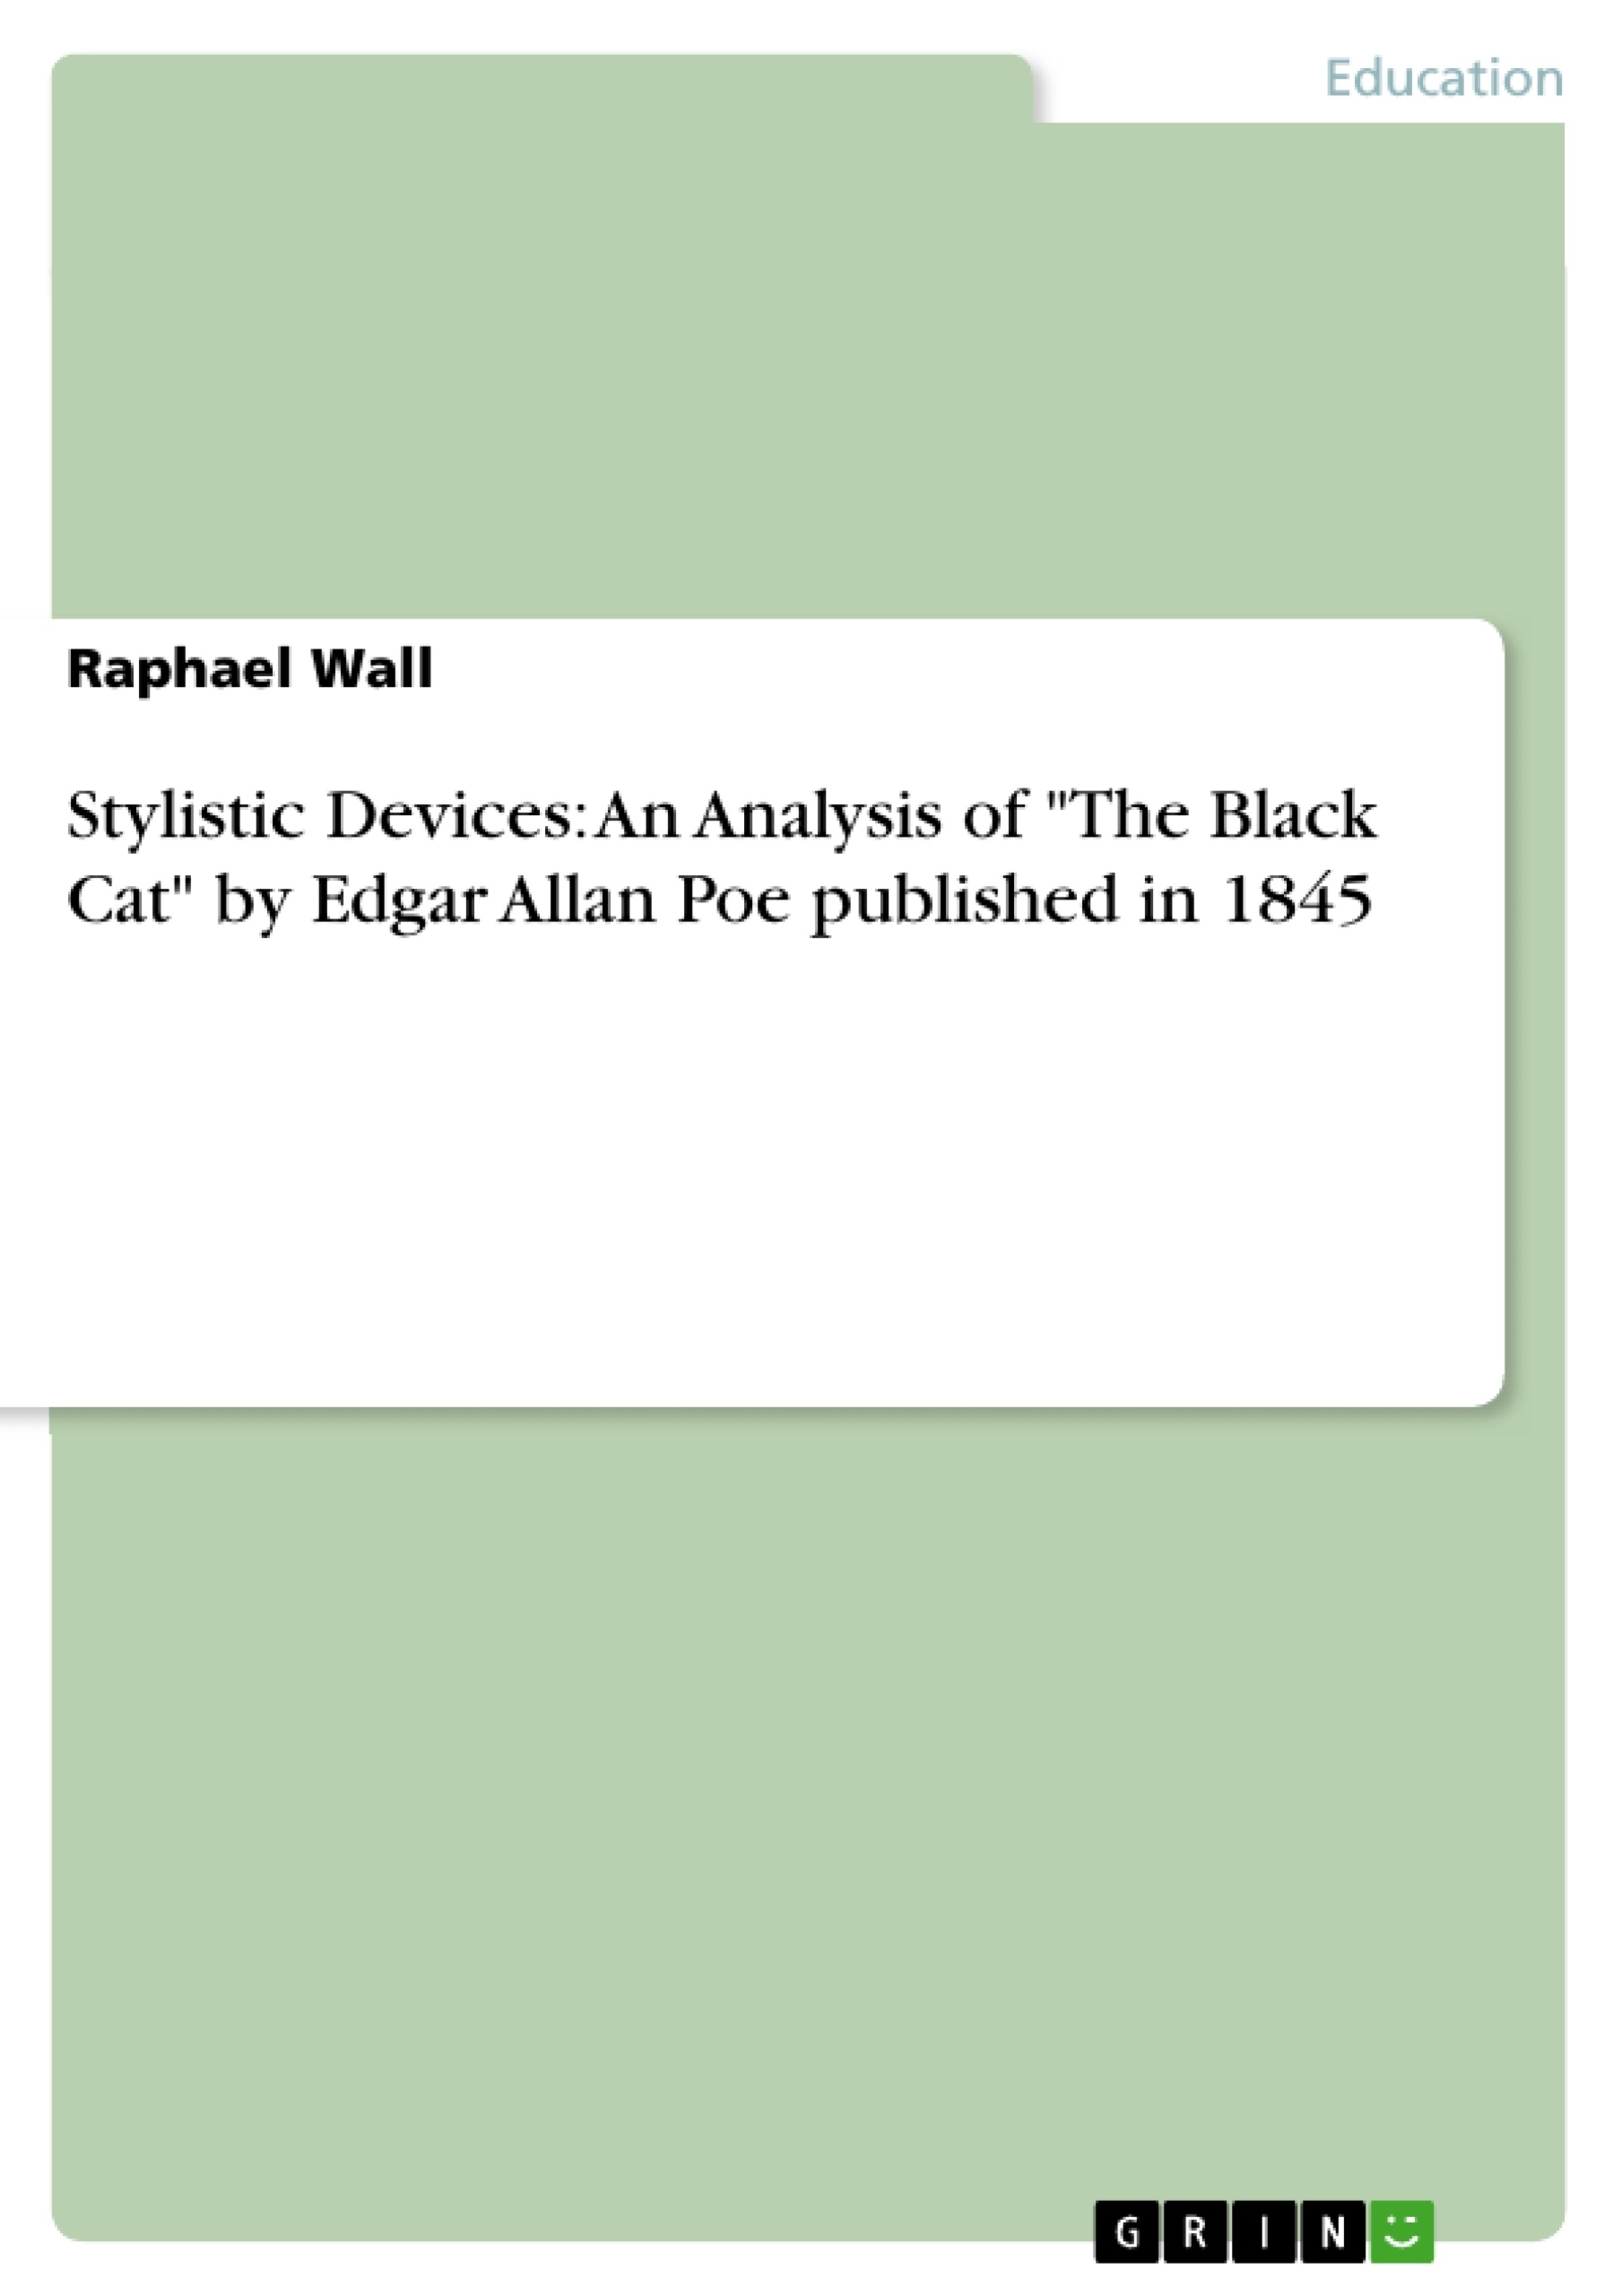 Titre: Stylistic Devices: An Analysis of "The Black Cat" by Edgar Allan Poe published in 1845